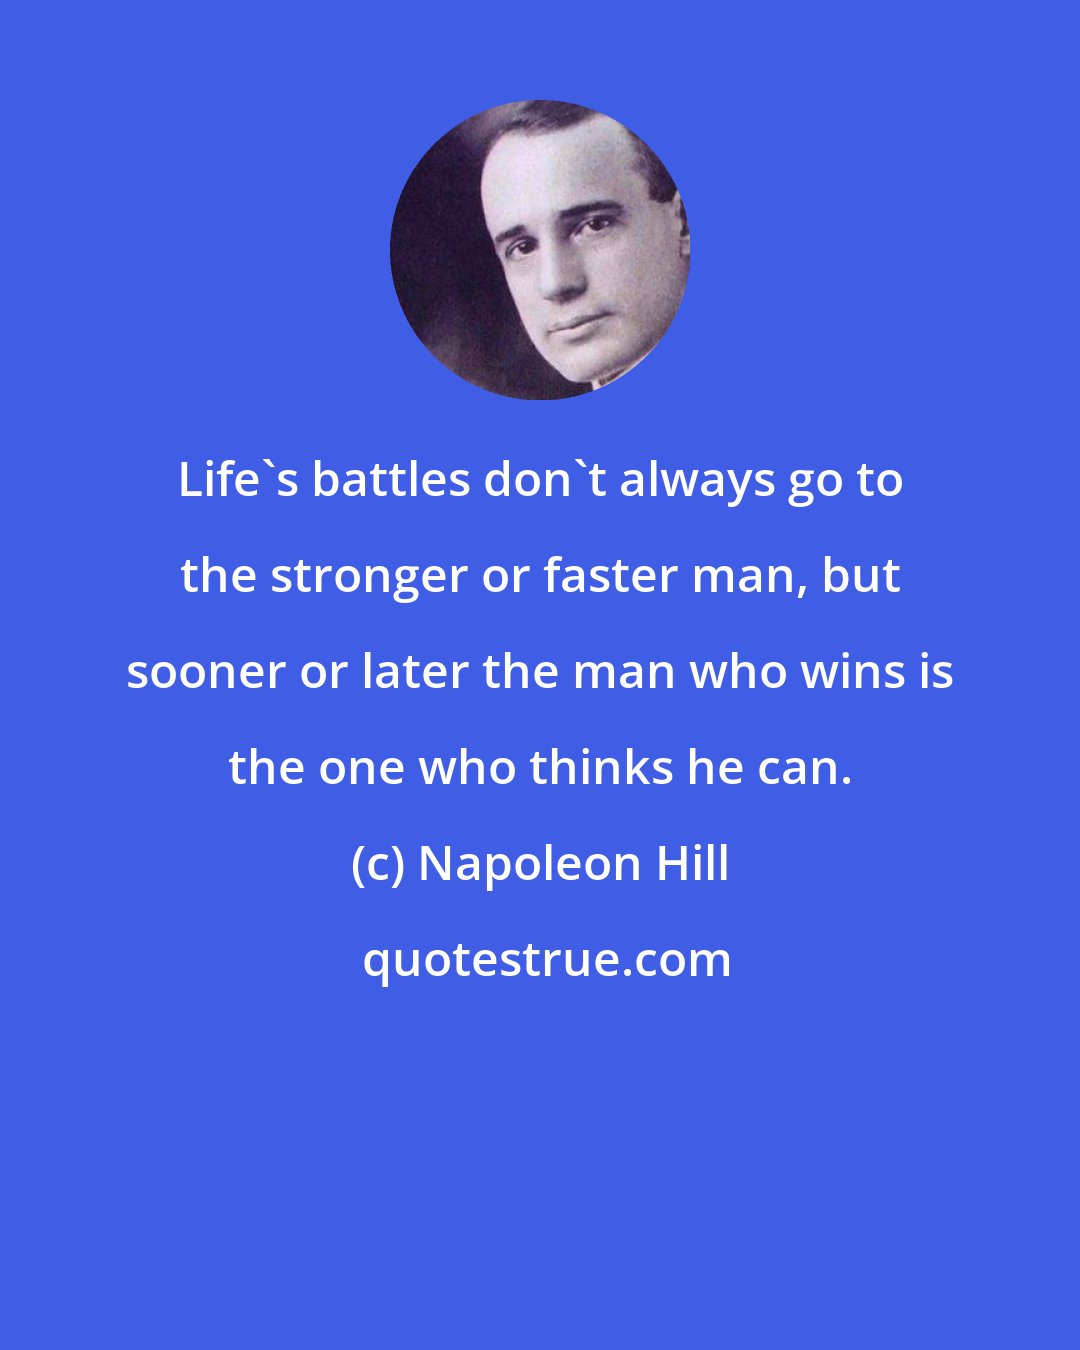 Napoleon Hill: Life's battles don't always go to the stronger or faster man, but sooner or later the man who wins is the one who thinks he can.